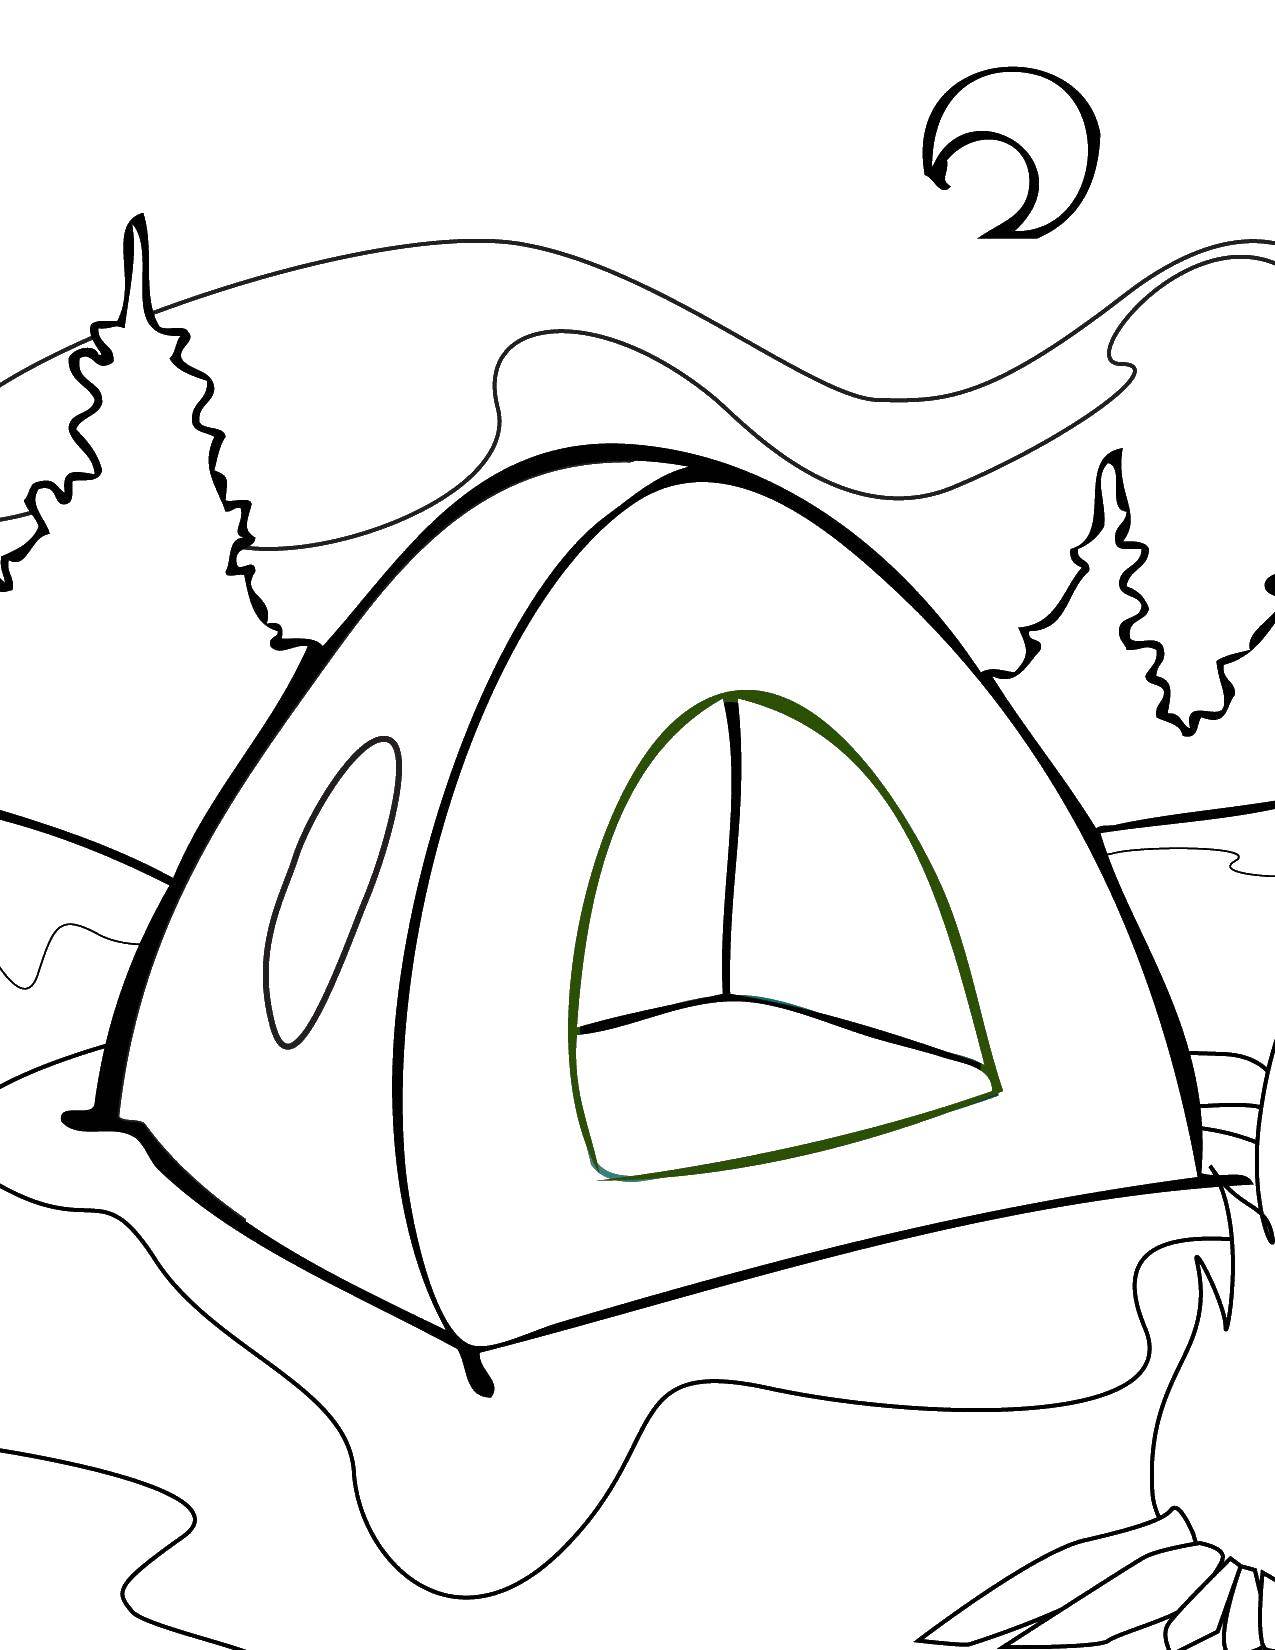 Coloring Tent in the night. Category Camping. Tags:  Leisure, hike, campfire, forest, night.